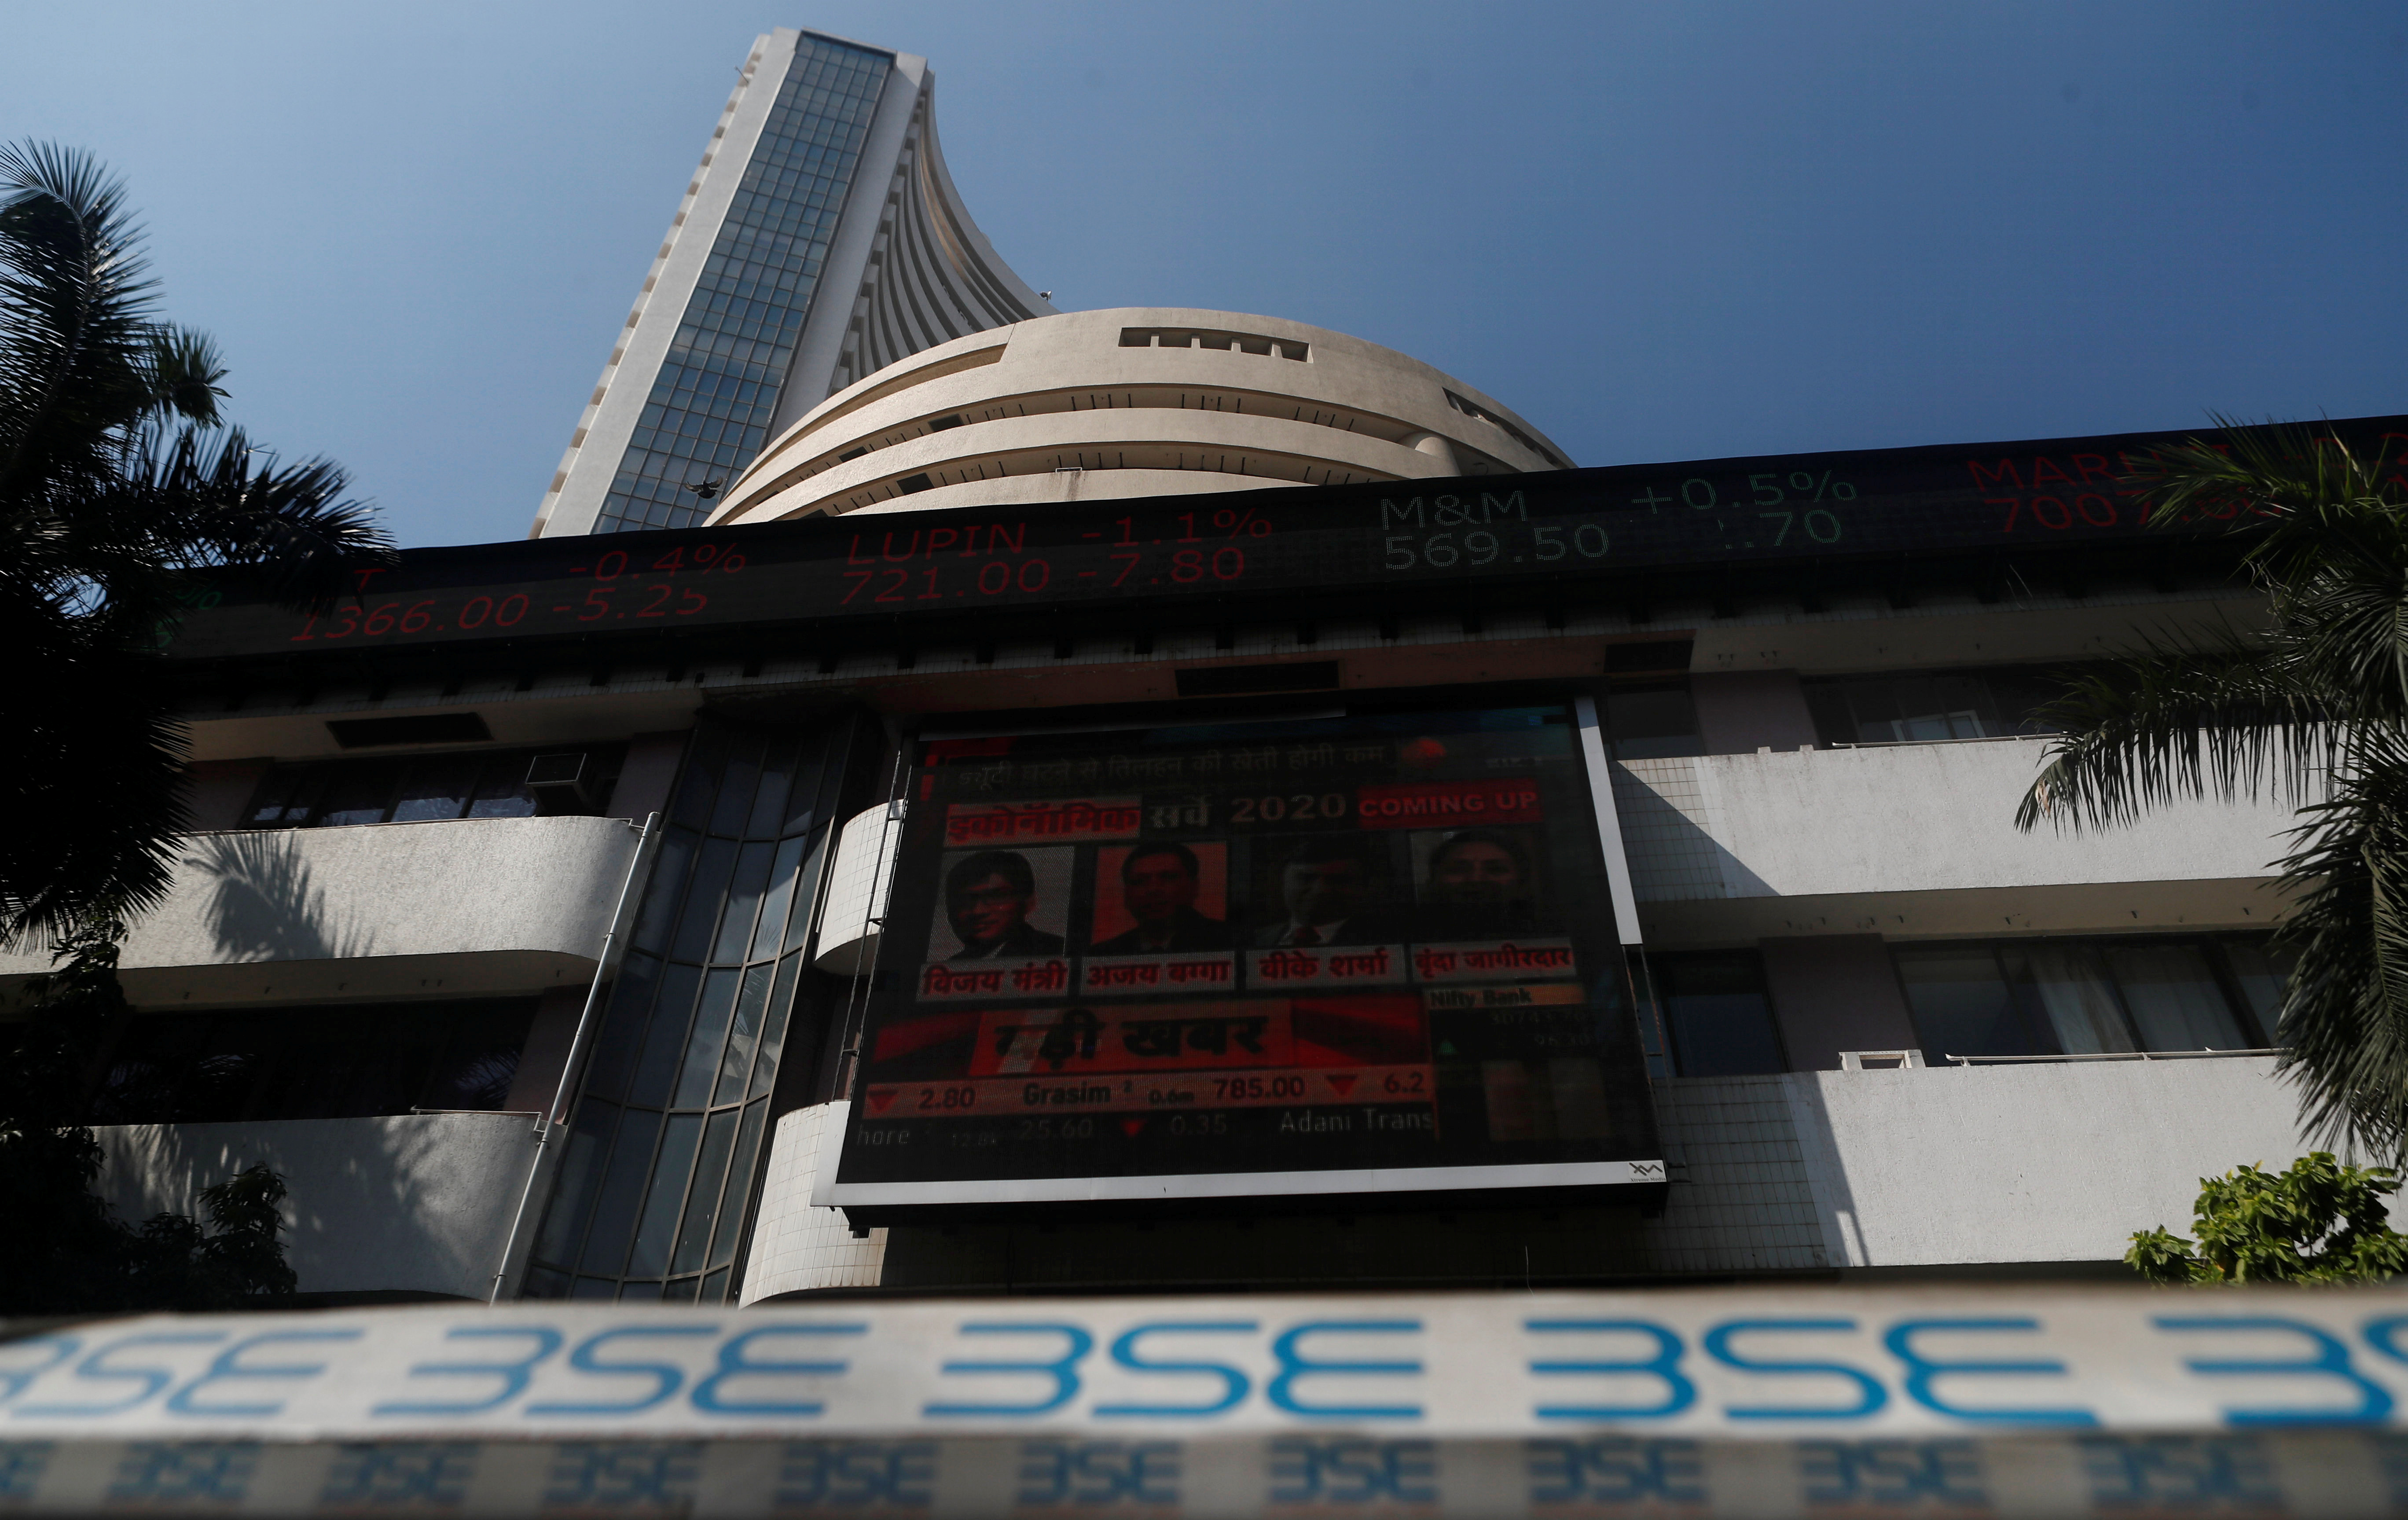 The Bombay Stock Exchange (BSE) building is seen in Mumbai, India, January 31, 2020. REUTERS/Francis Mascarenhas